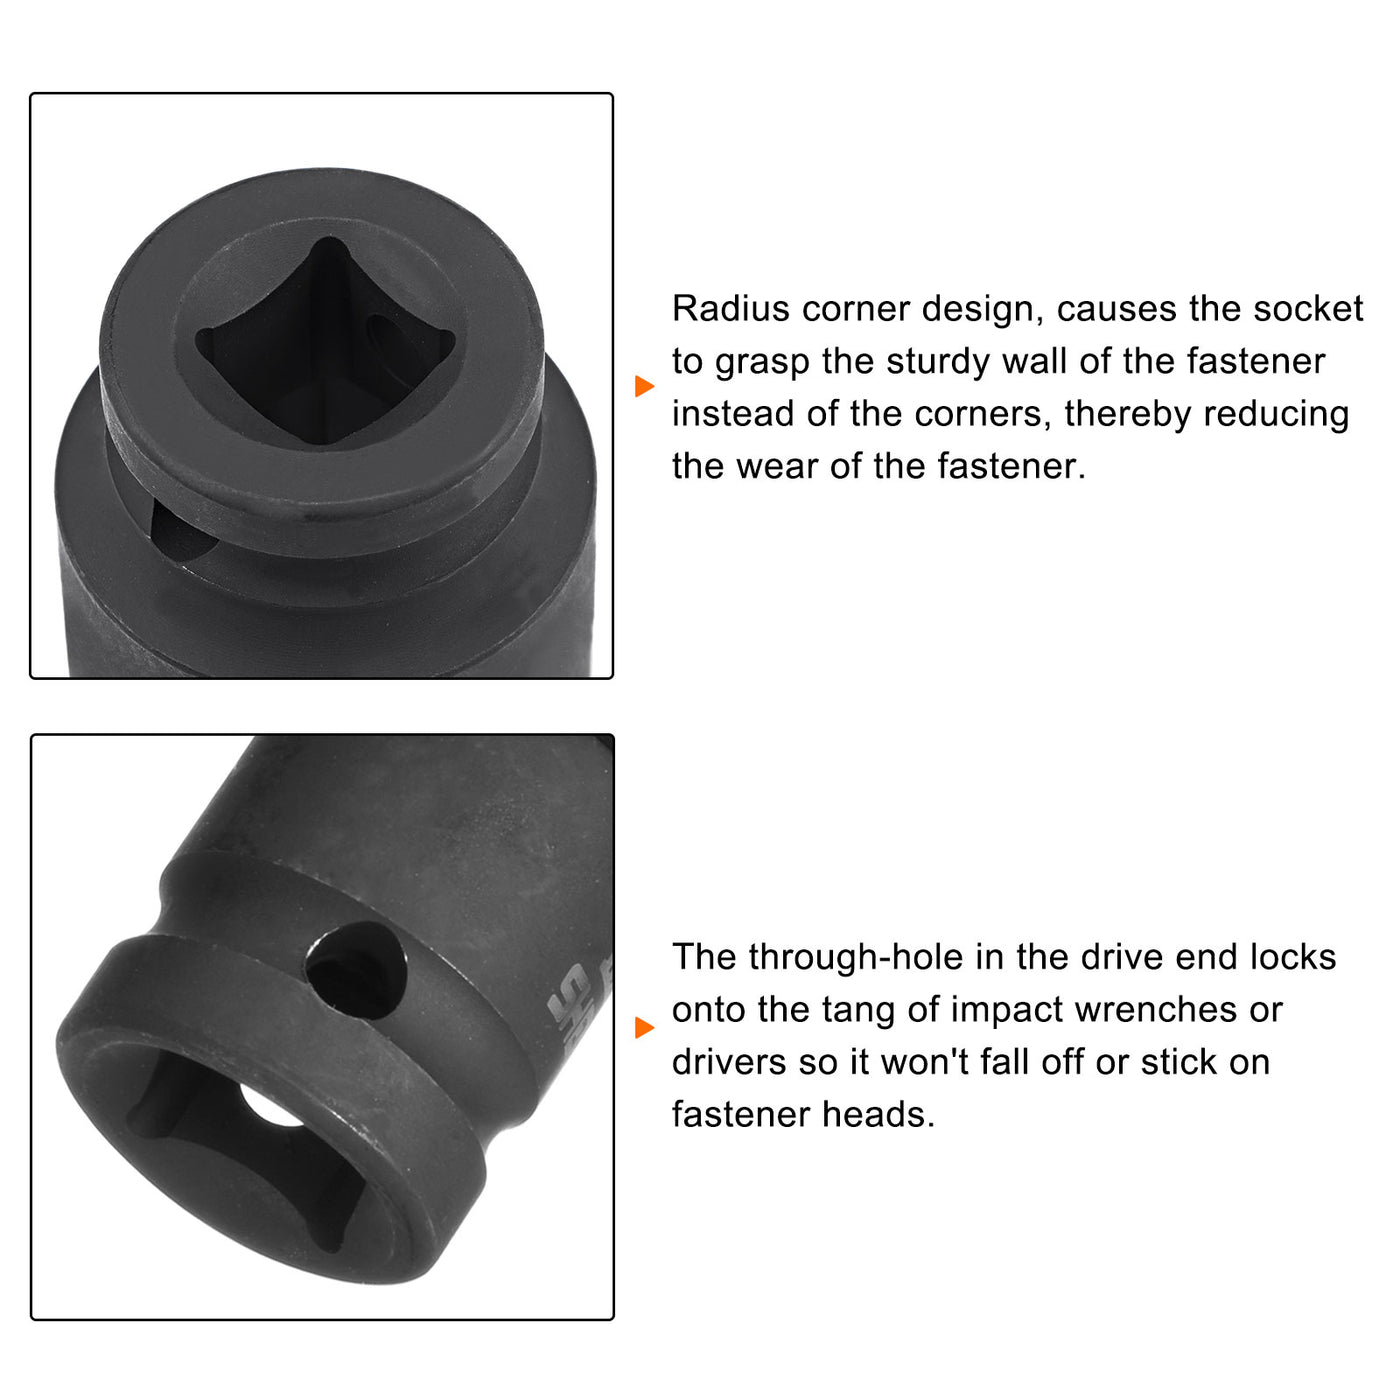 Harfington 34mm Impact Shallow Socket 1/2" Drive CR-MO Steel with 360° Universal Joint